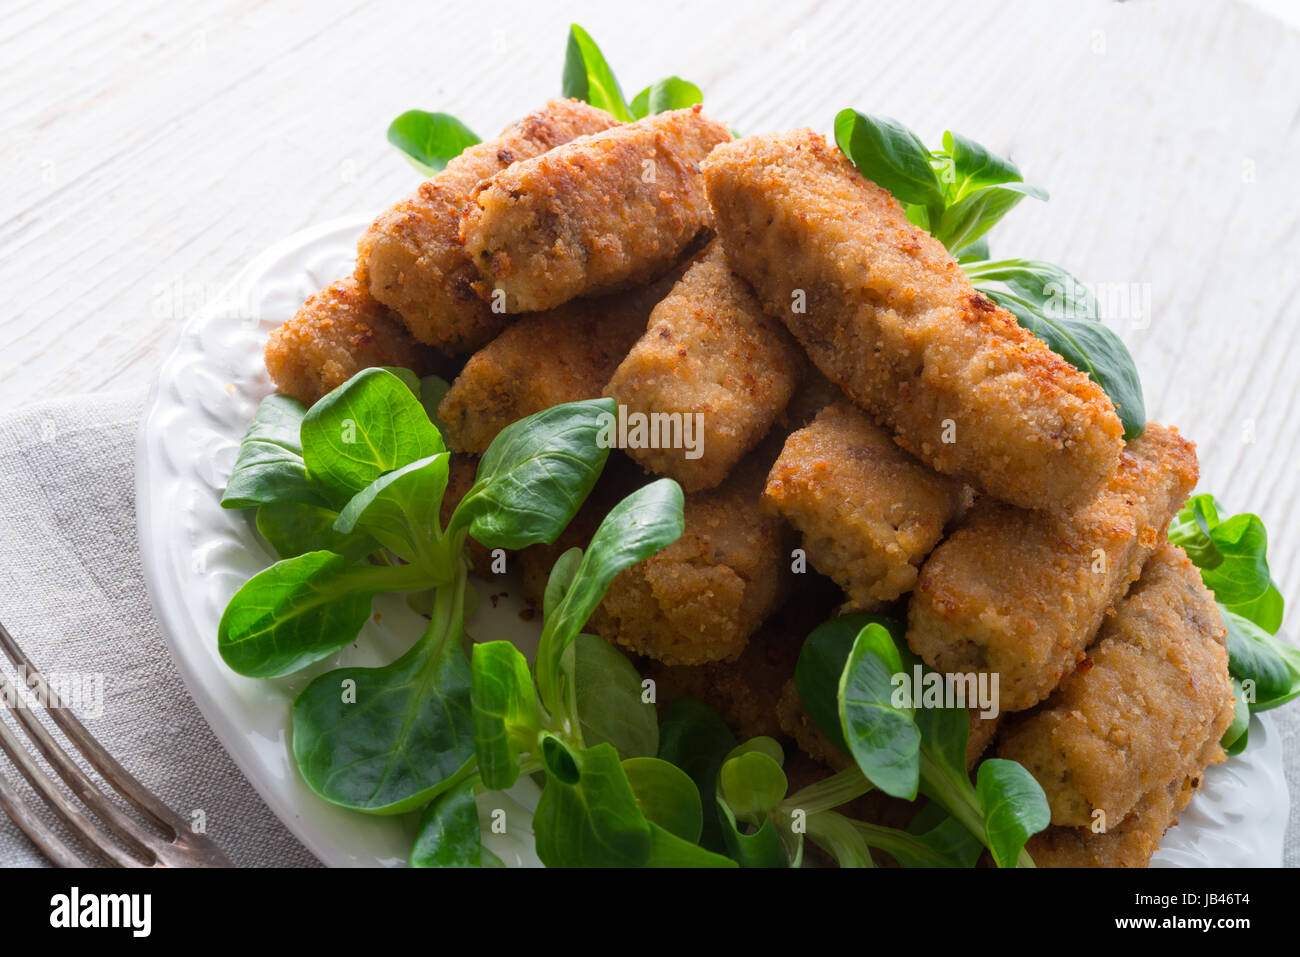 home-baked fish sticks with salad Stock Photo